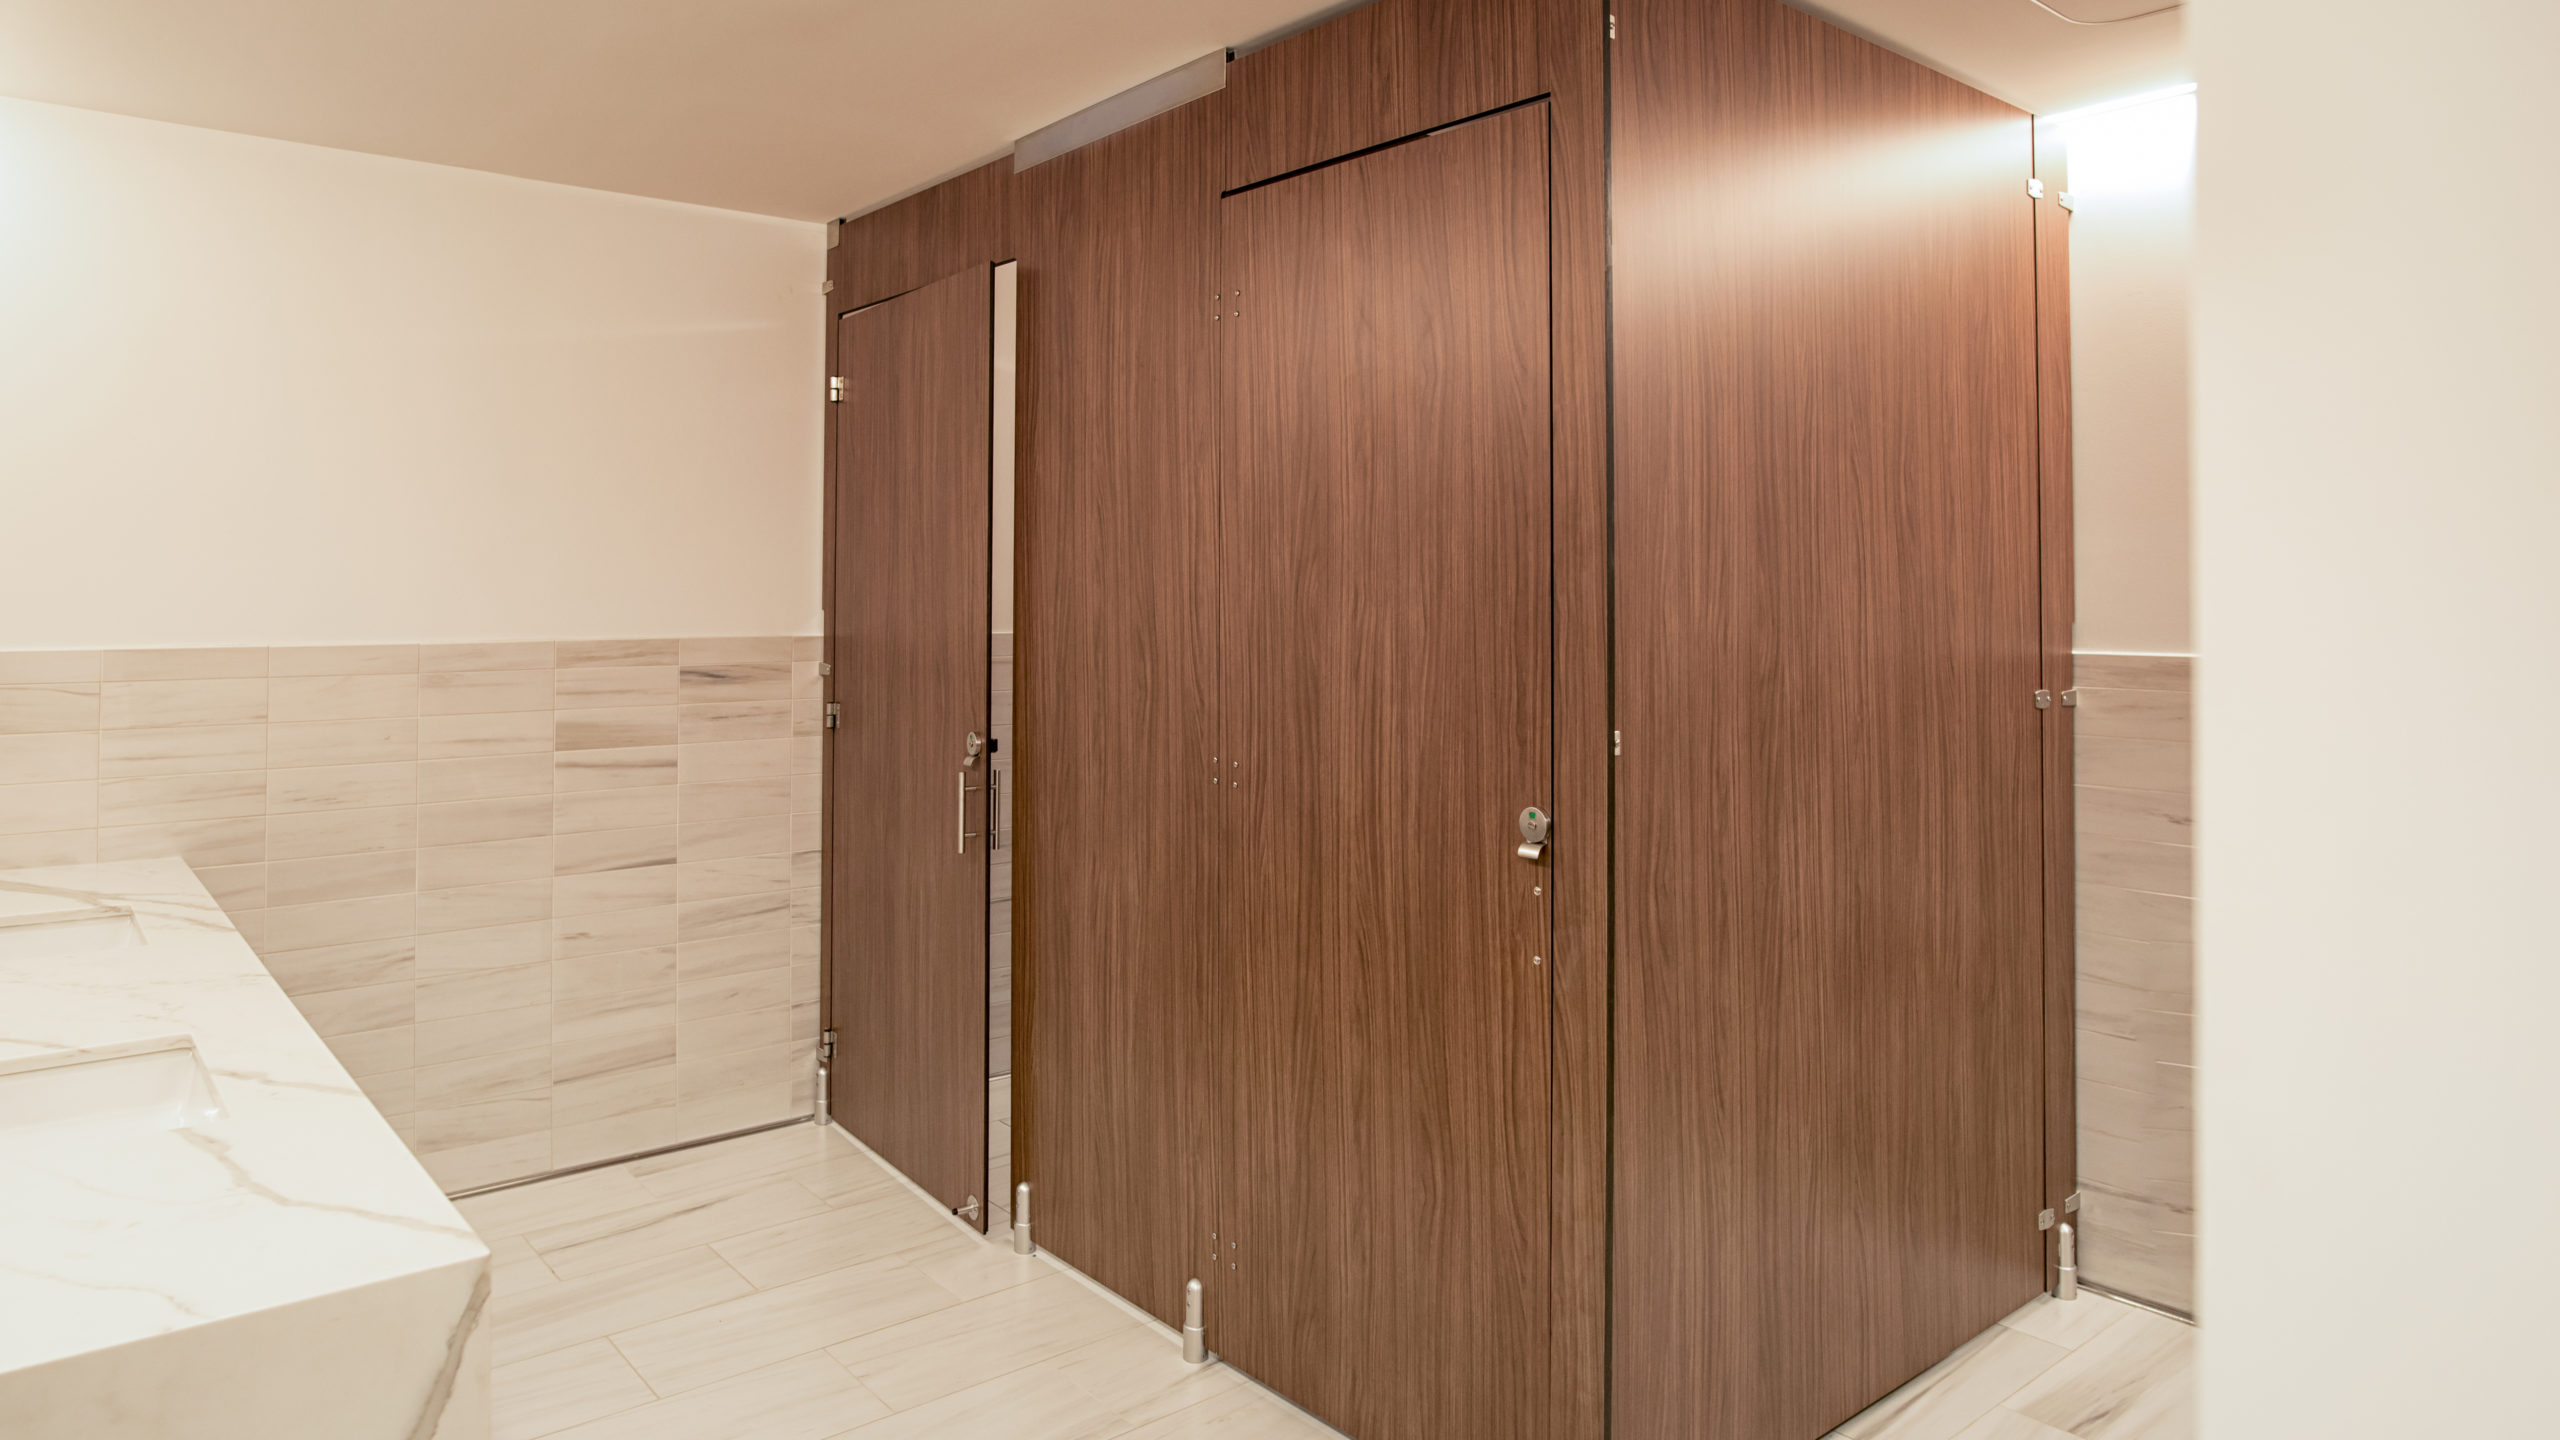 Executive office employee bathroom in compact laminate partitions with full height configuration showing transoms for added privacy.